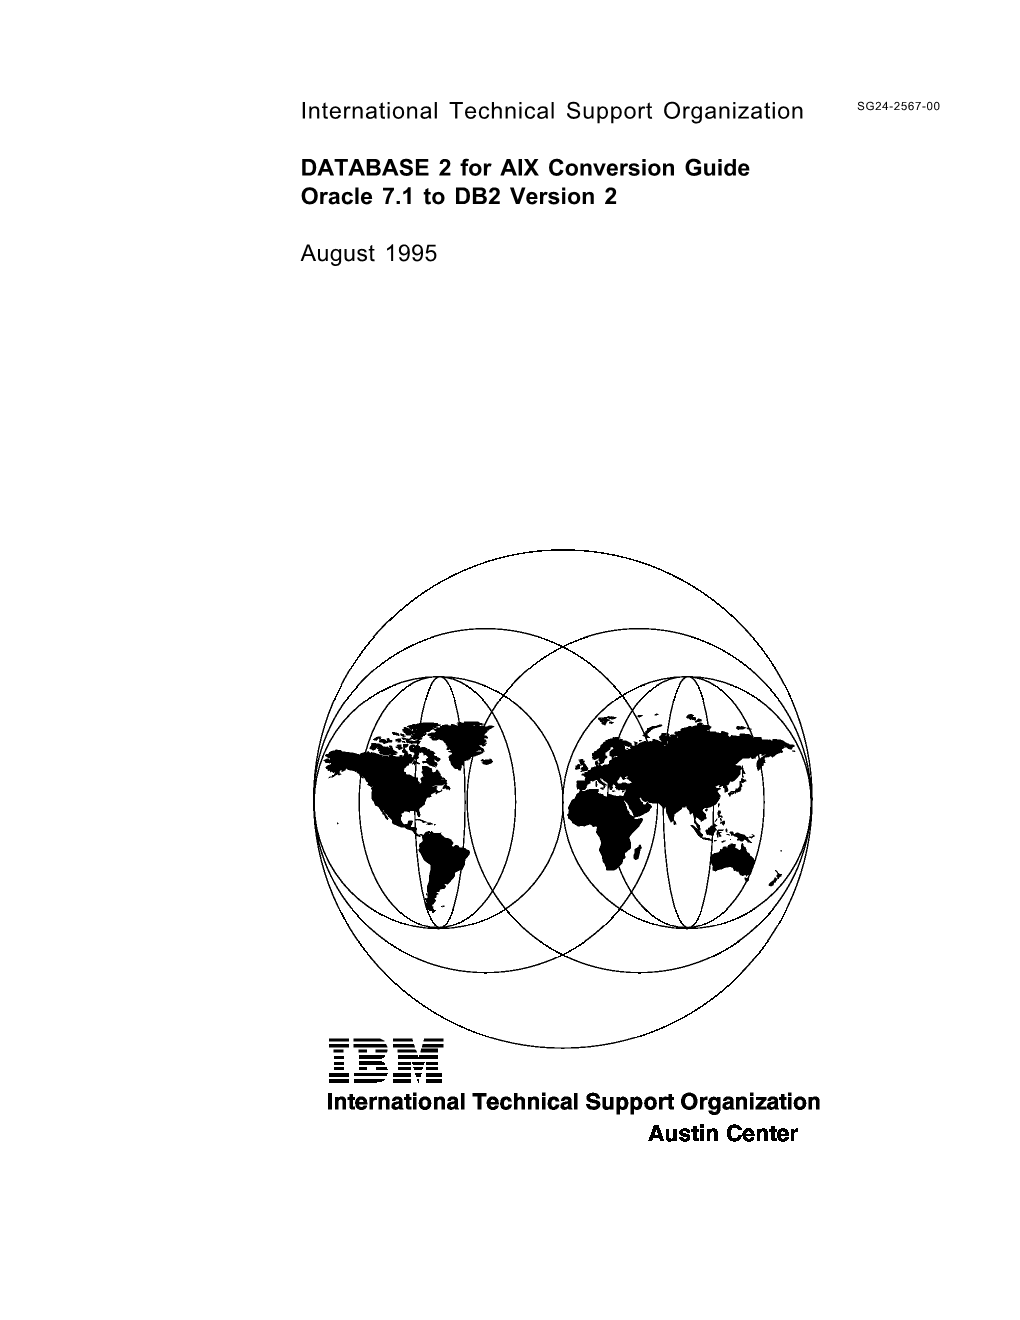 International Technical Support Organization DATABASE 2 for AIX Conversion Guide Oracle 7.1 to DB2 Version 2 August 1995 Publication No